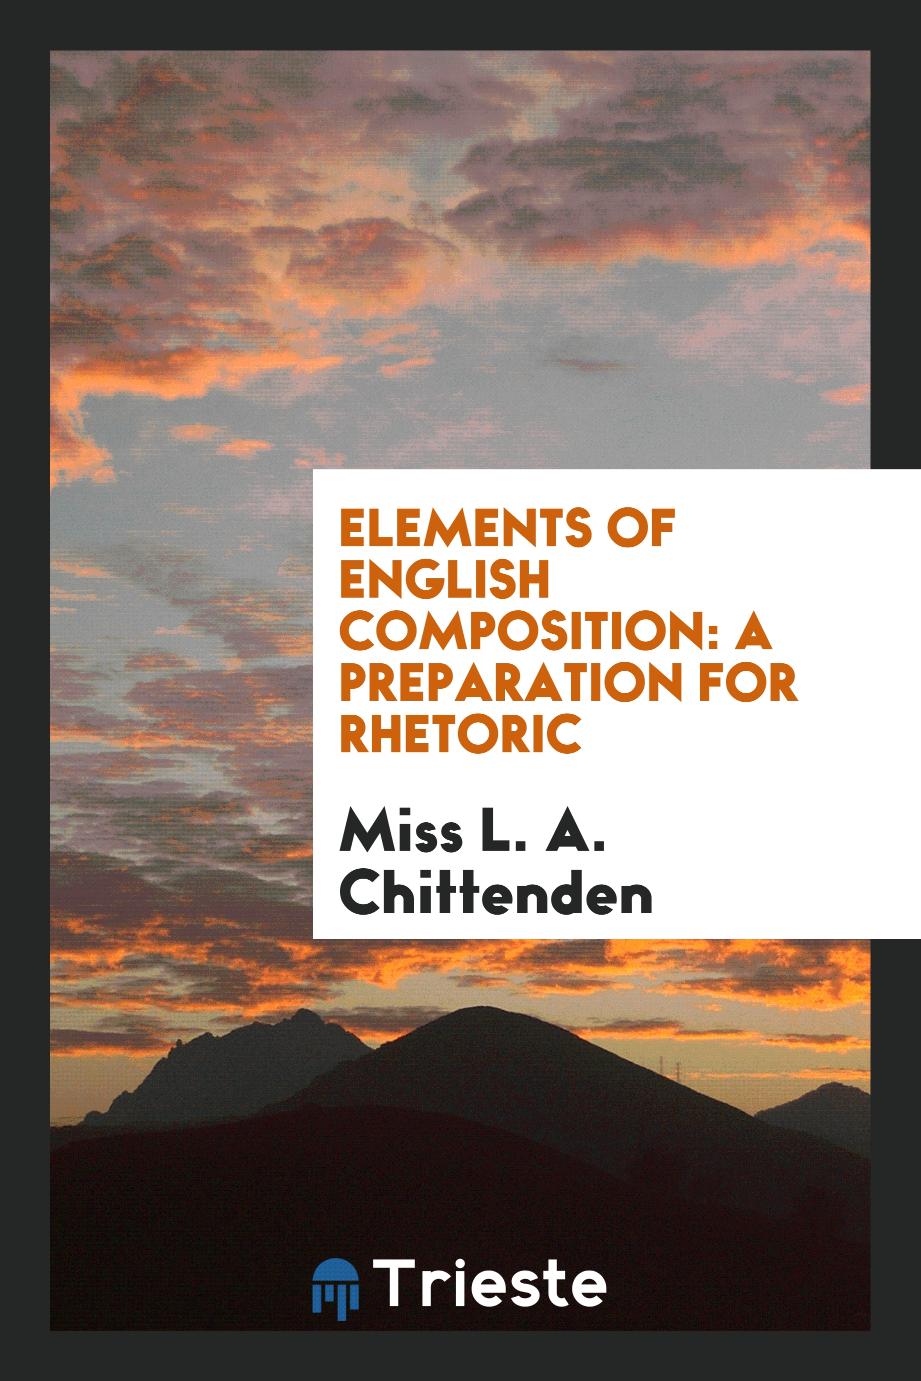 Miss L. A. Chittenden - Elements of English Composition: A Preparation for Rhetoric